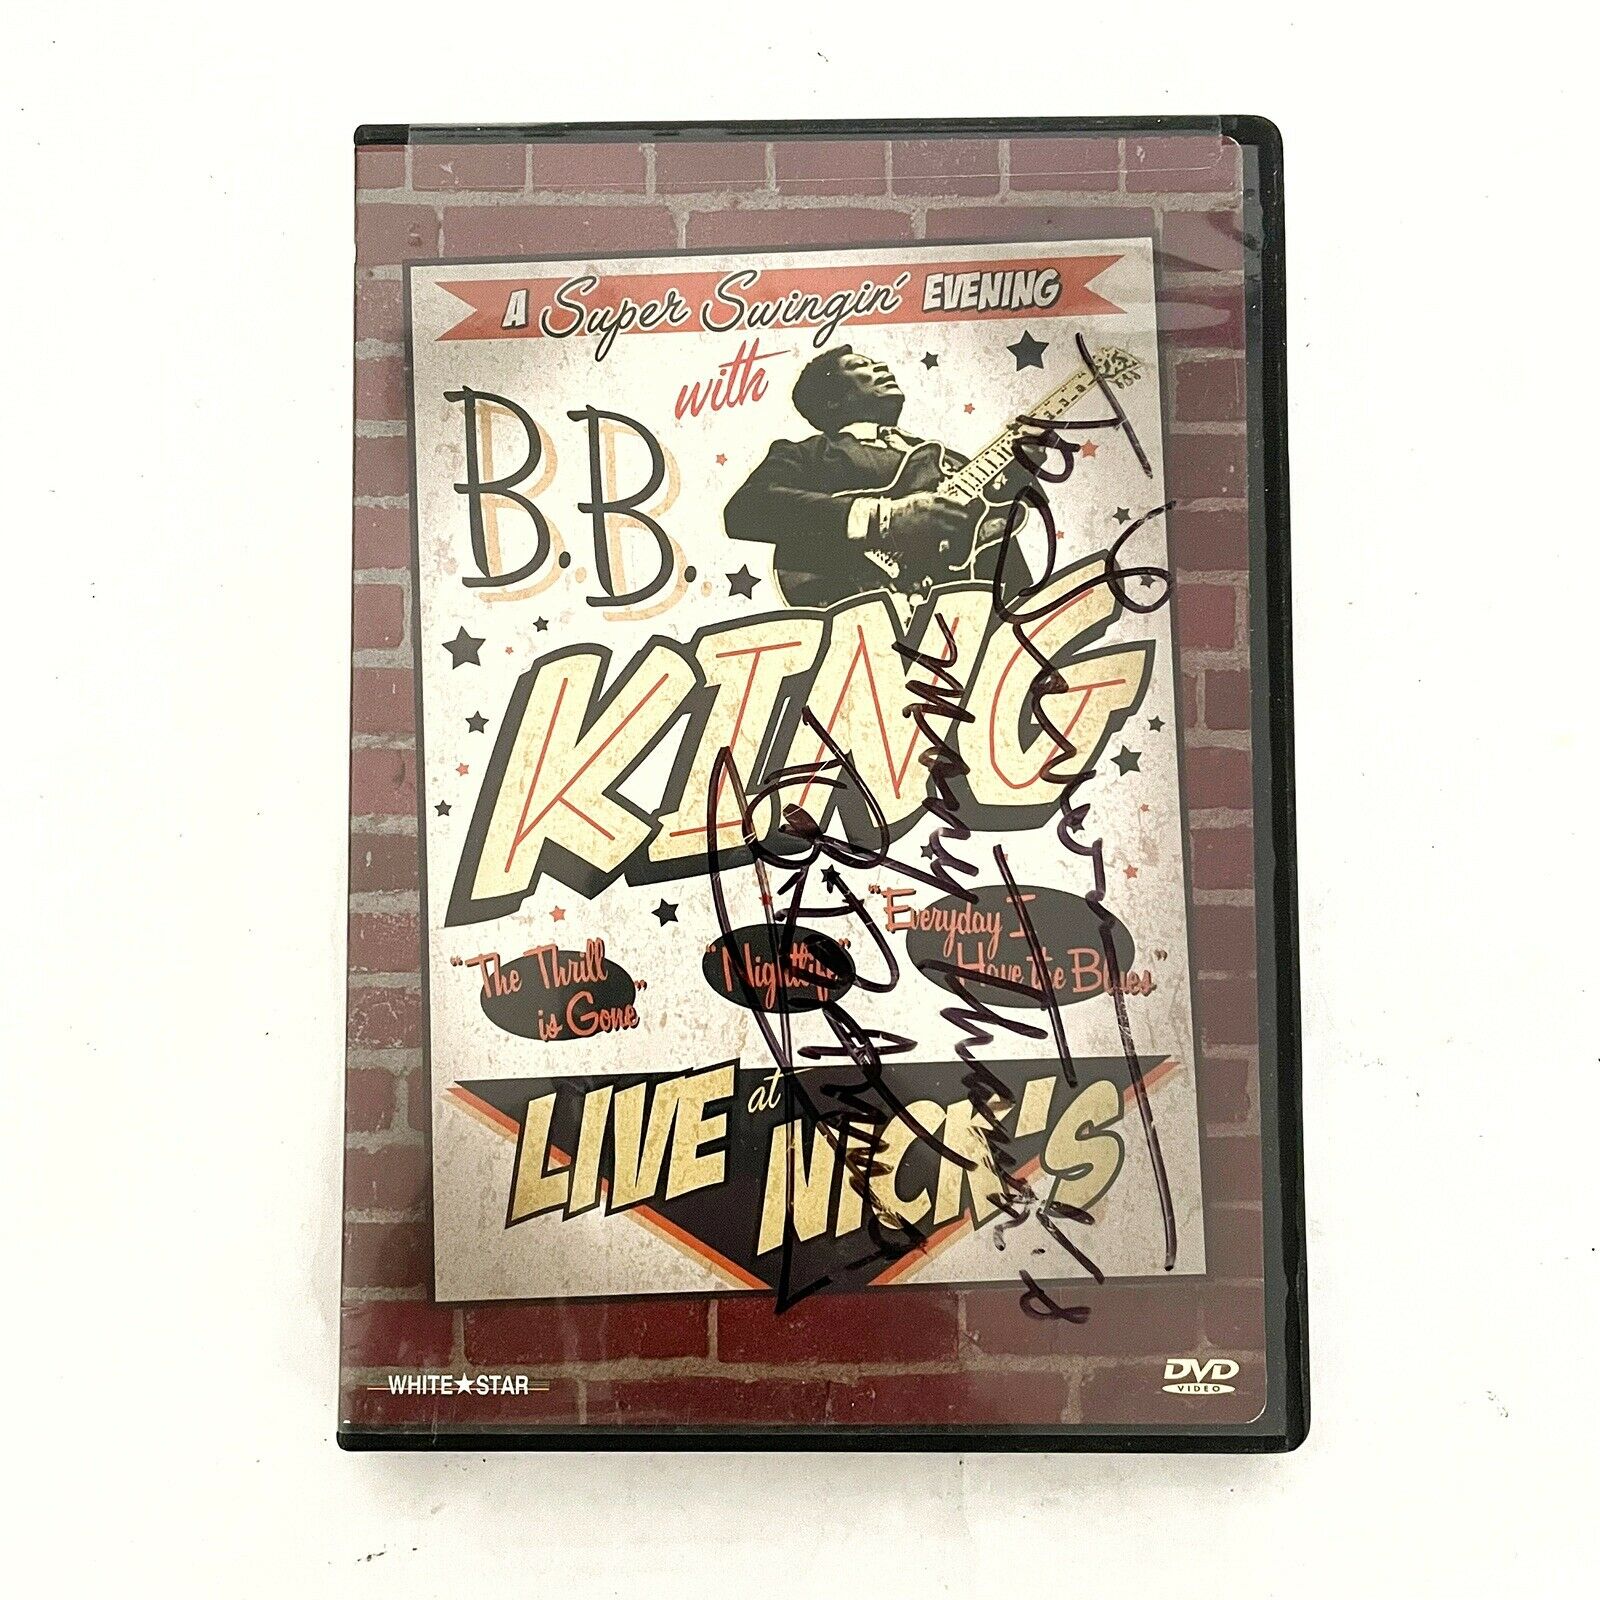 B.B. King - Live at Nicks (DVD, 2002) Case Signed Autographed By B.B. King